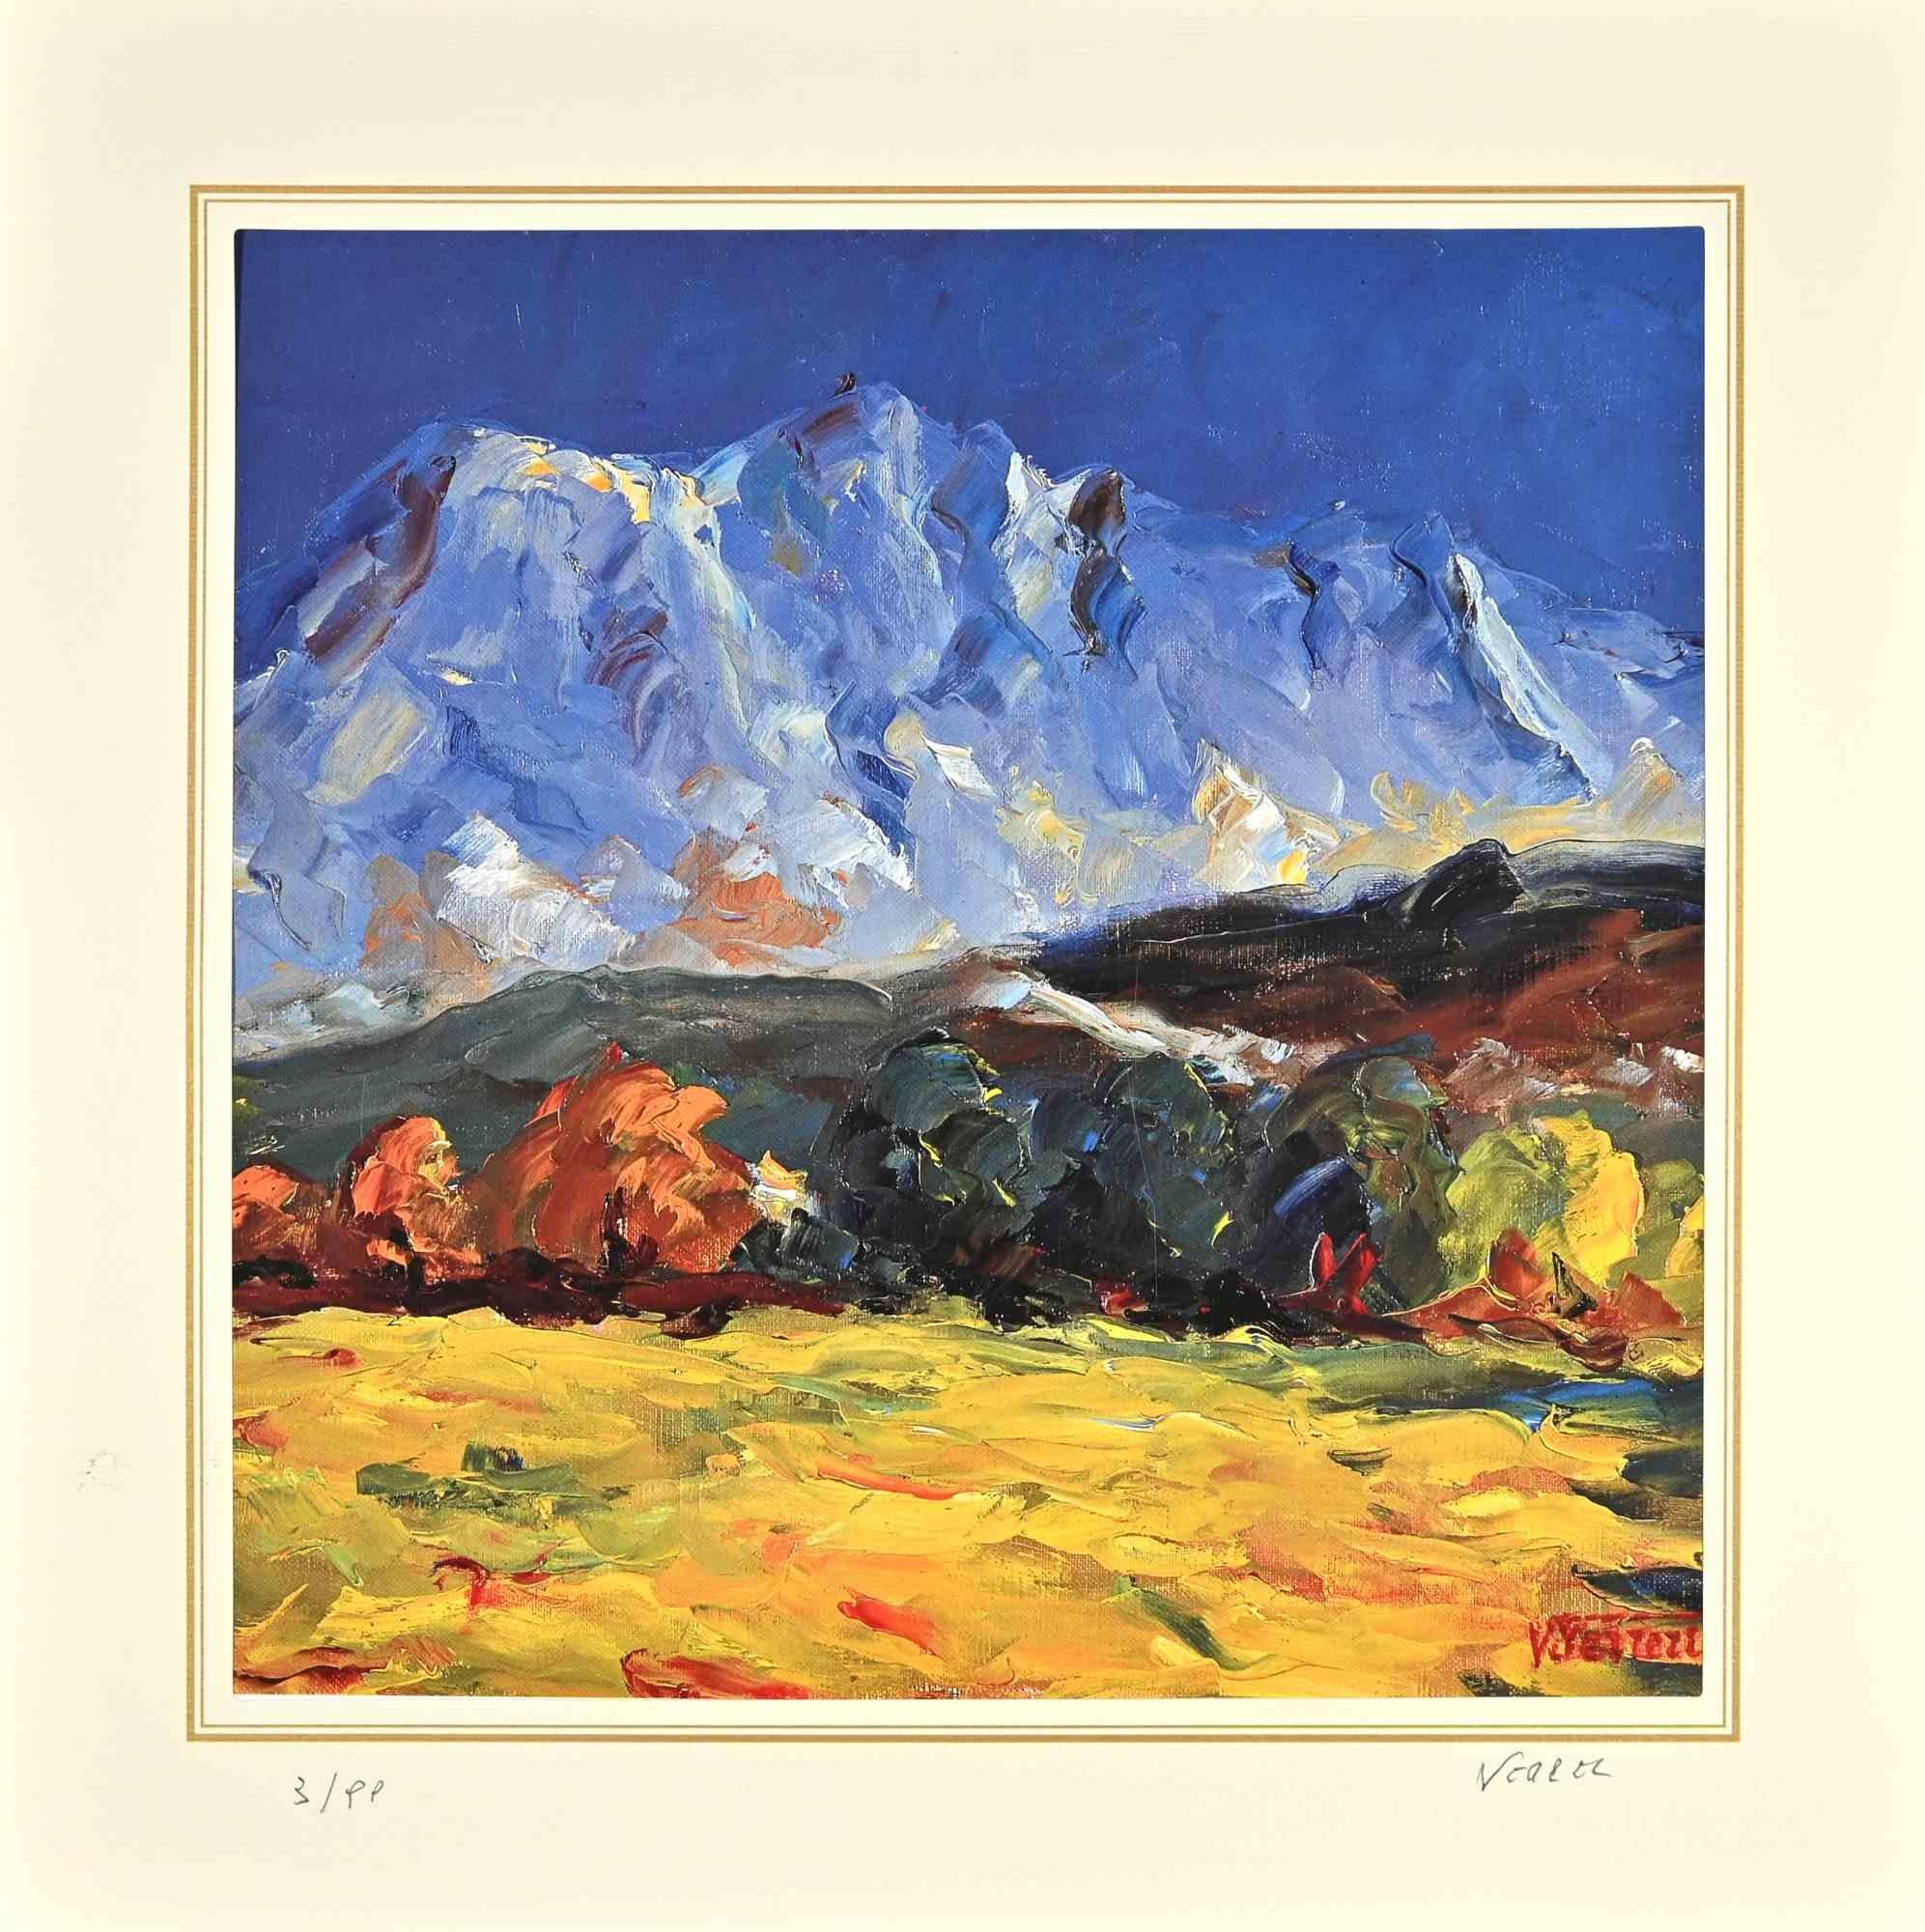 Landscape  with Mountains is a lithograph attributed to Nicholas Verrall (1945) in the Late 20th Century.

Hand-signed on the right corner. Numbered, Edition, 3/99, on the left margin. On the back is the label of the certificate of 